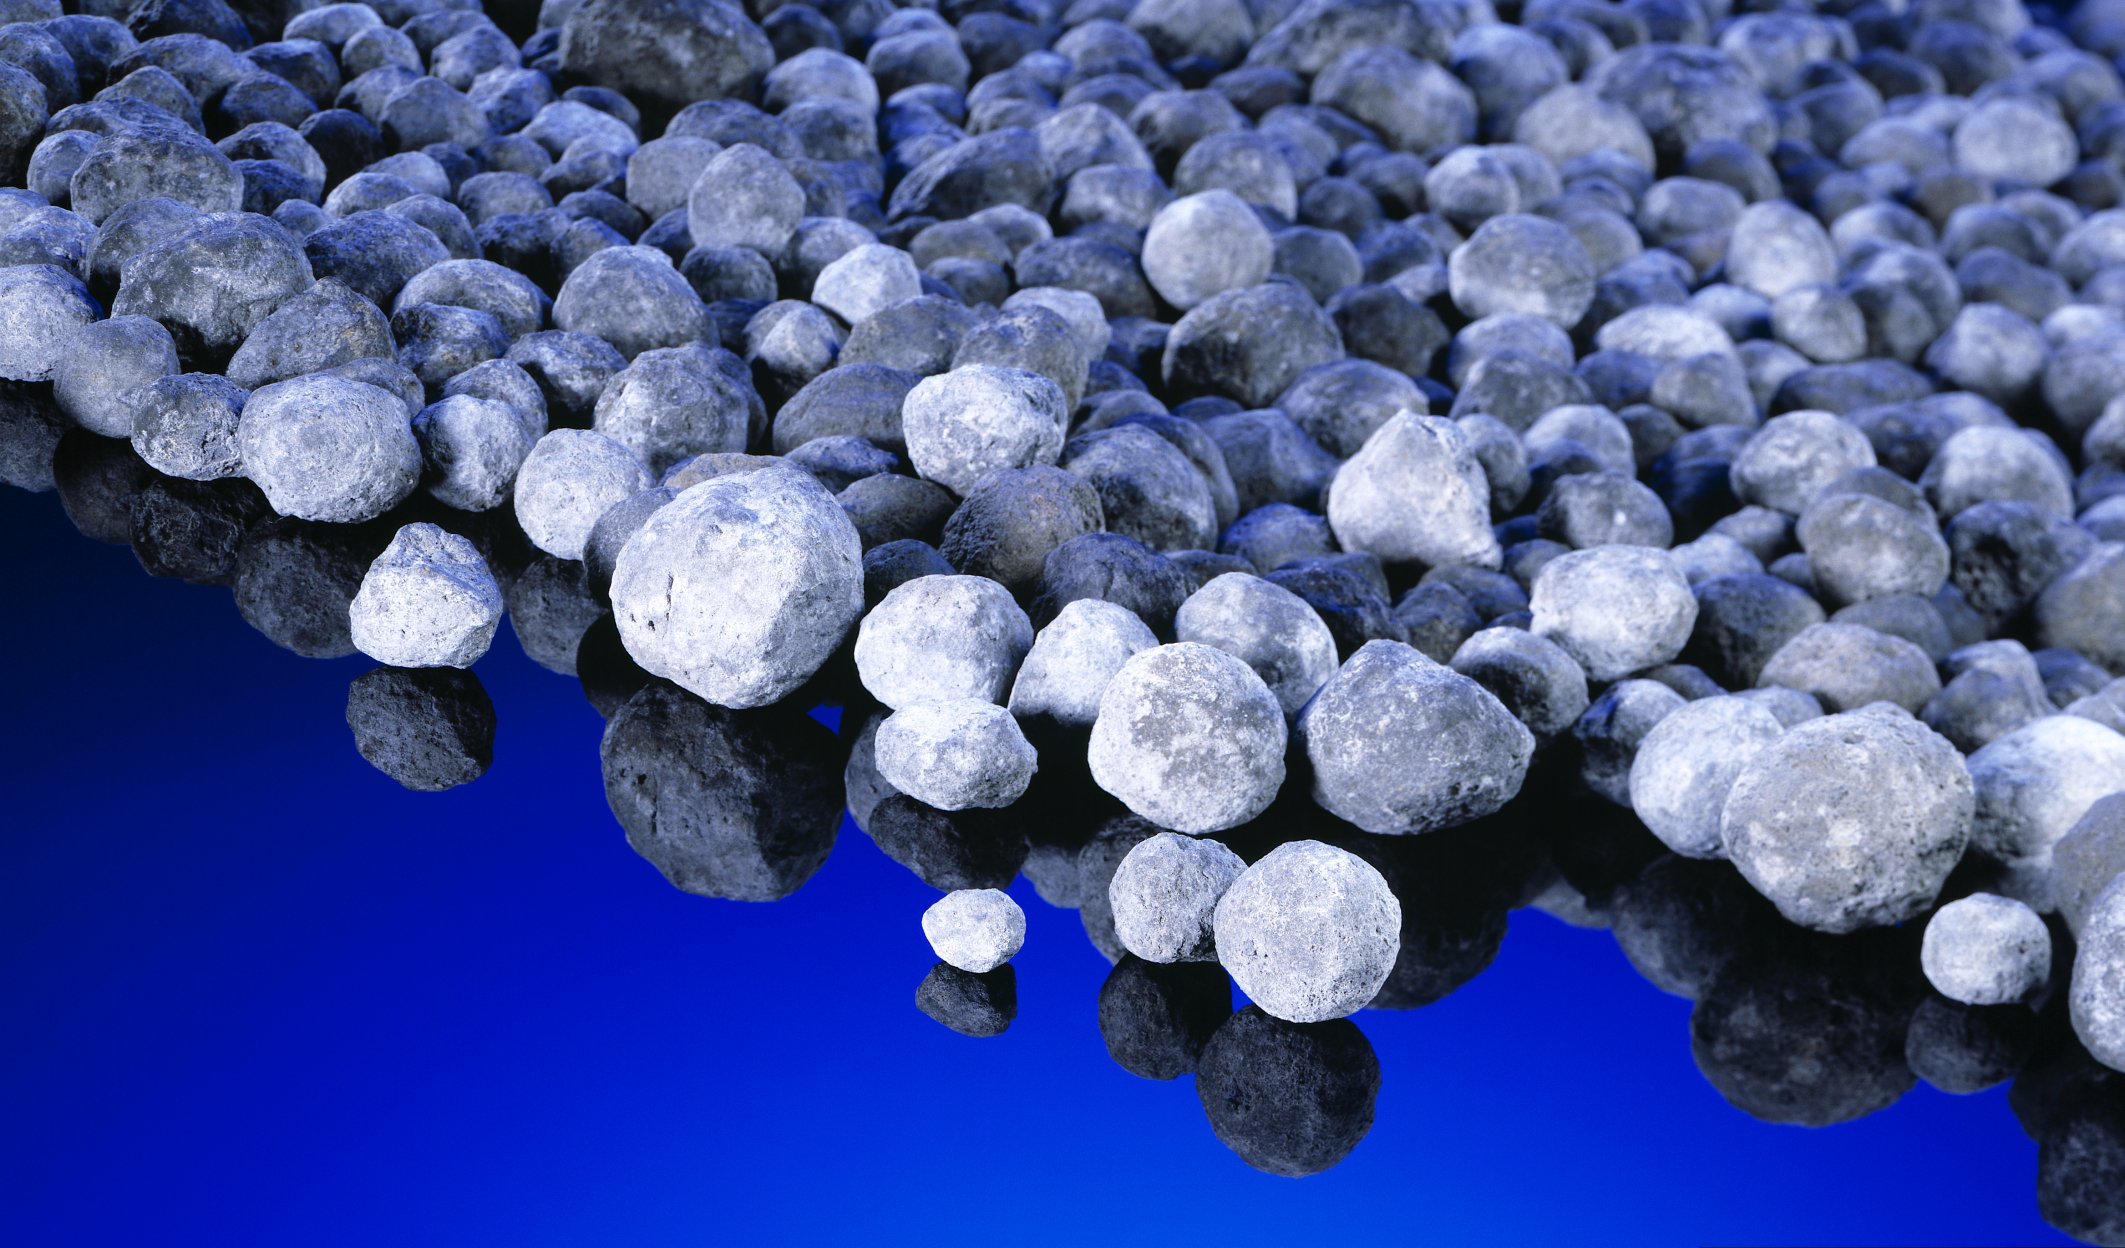 Amorphous white-grey stones on a blue surface